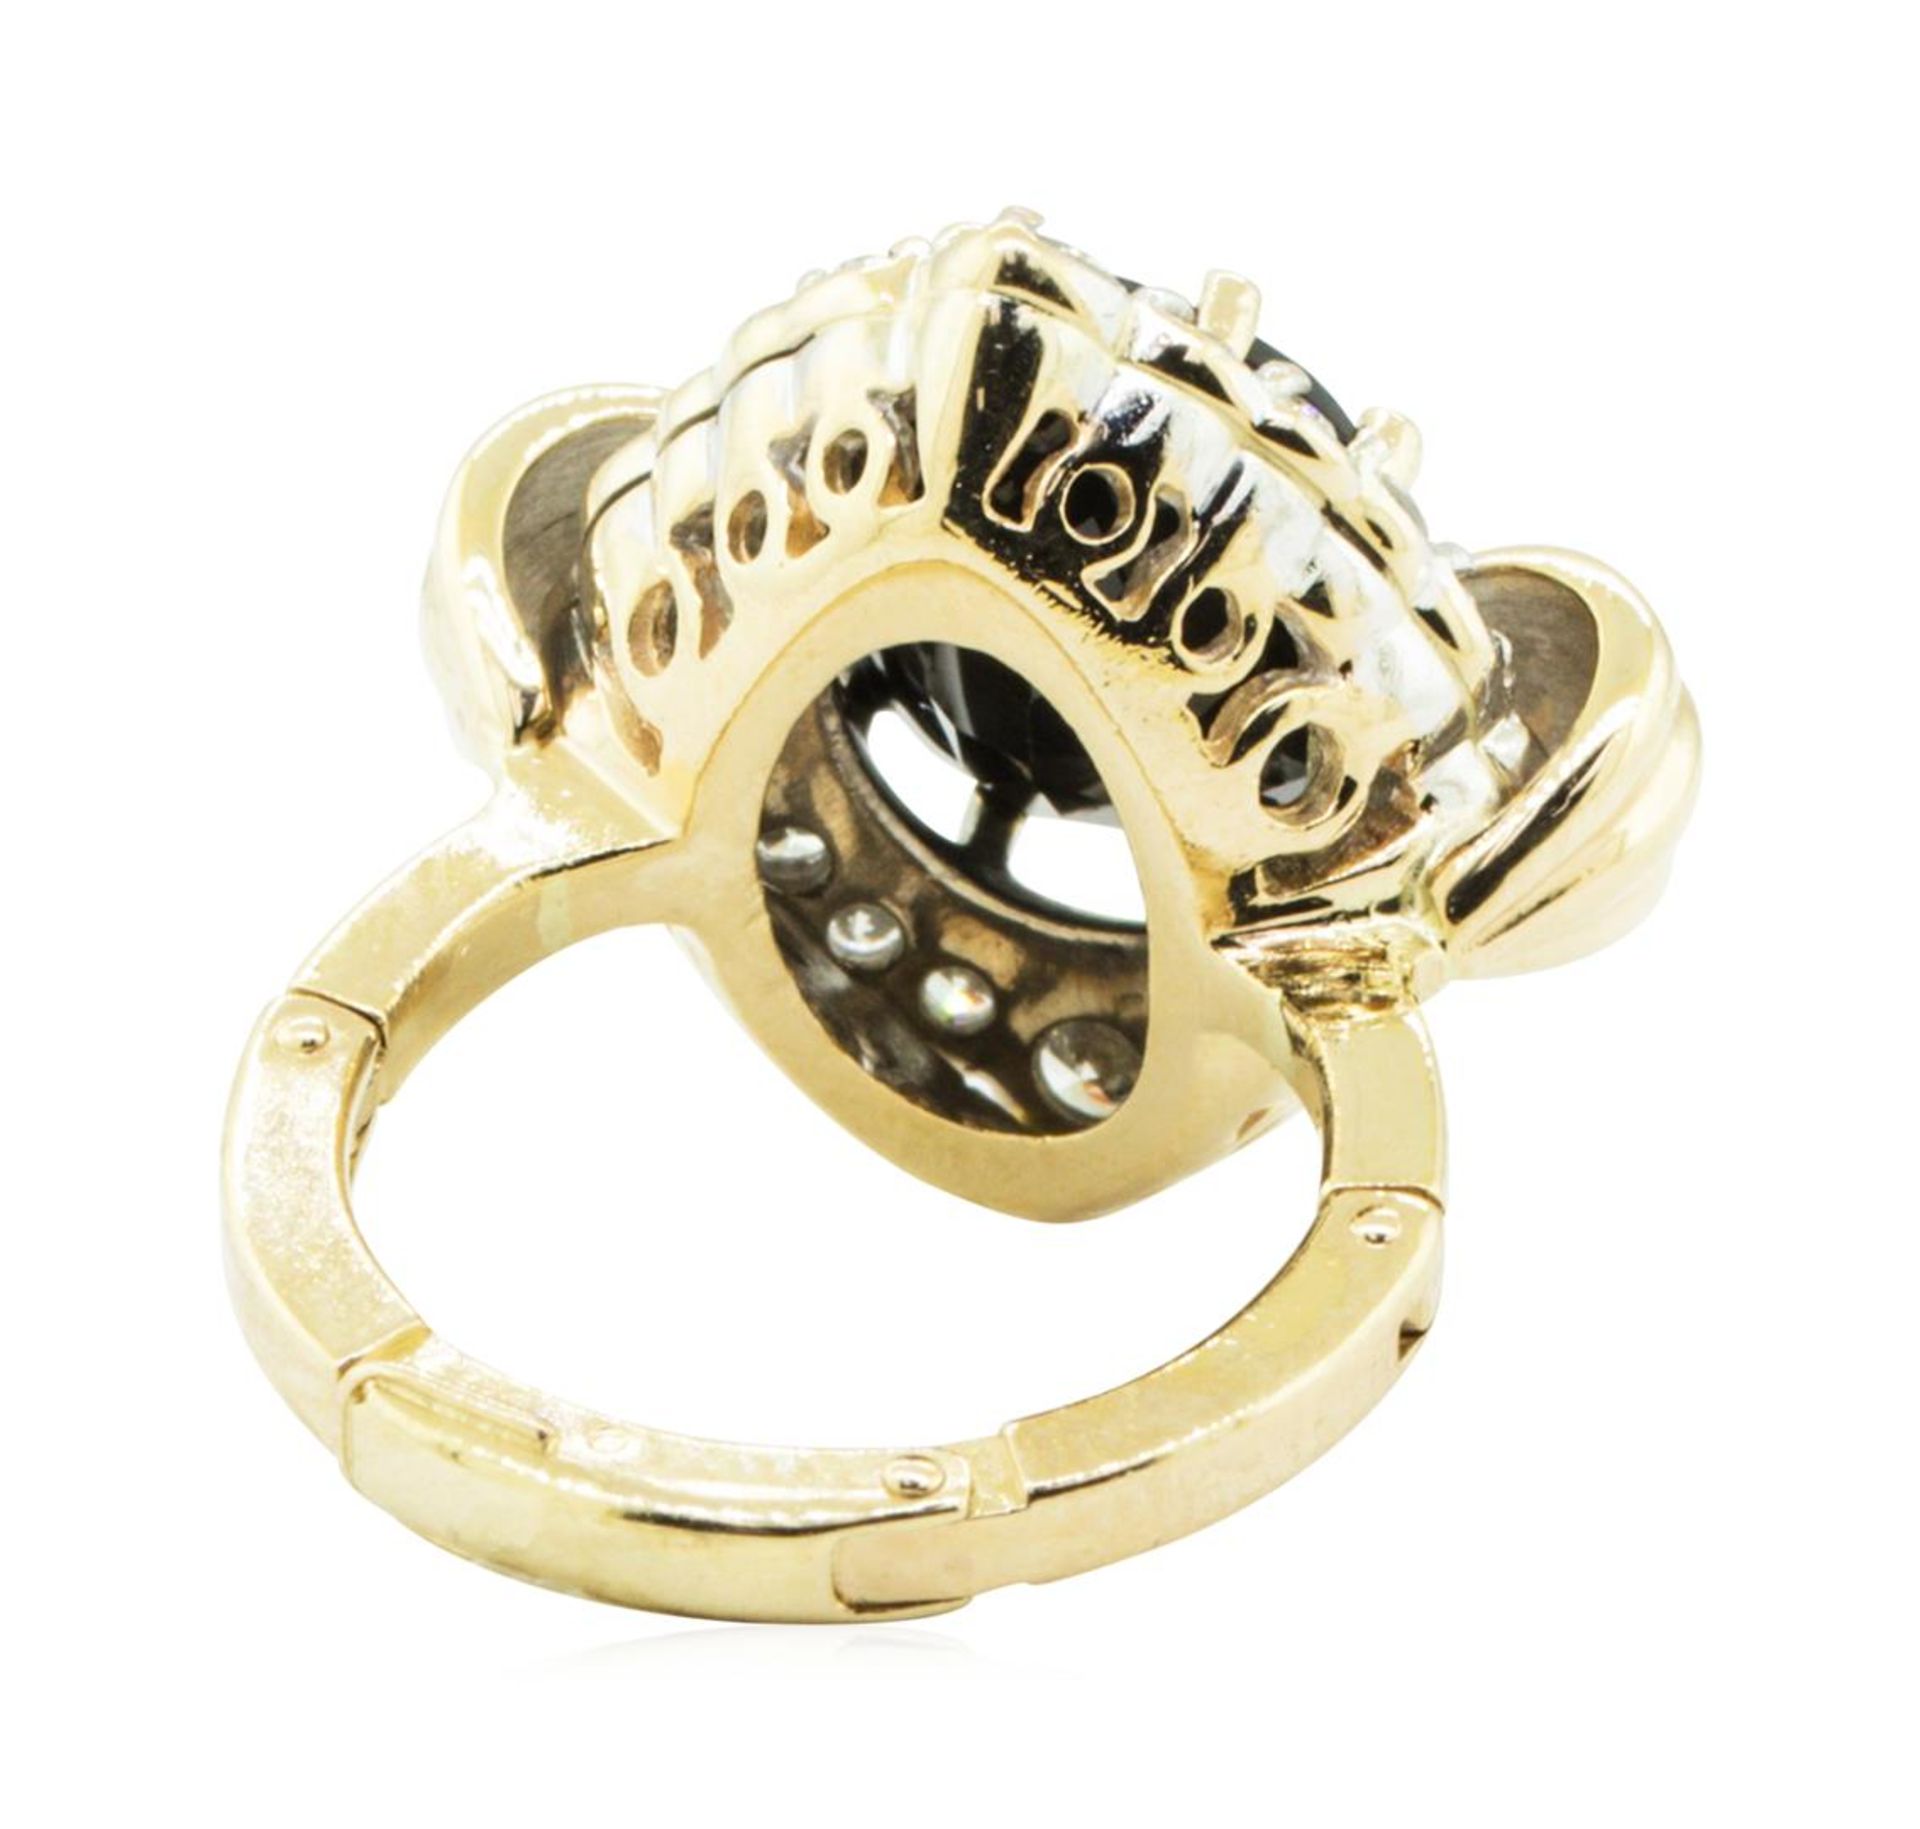 5.75 ctw Oval Brilliant Onyx And Diamond Ring - 14KT Yellow And White Gold - Image 3 of 5